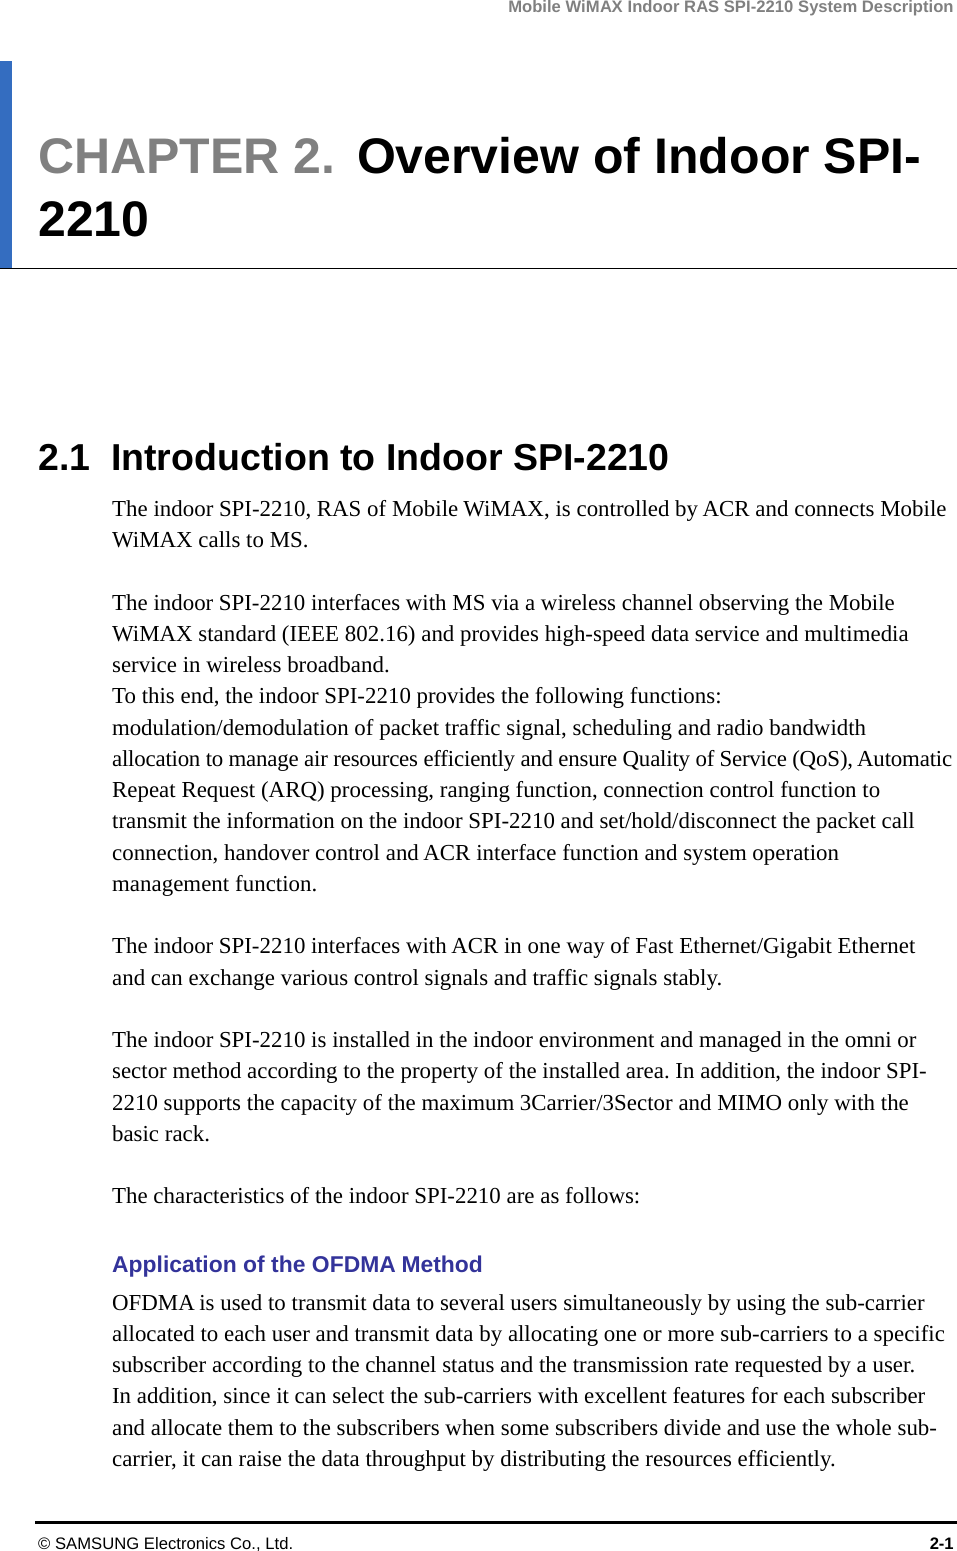 Mobile WiMAX Indoor RAS SPI-2210 System Description © SAMSUNG Electronics Co., Ltd.  2-1 CHAPTER 2.  Overview of Indoor SPI-2210      2.1  Introduction to Indoor SPI-2210 The indoor SPI-2210, RAS of Mobile WiMAX, is controlled by ACR and connects Mobile WiMAX calls to MS.  The indoor SPI-2210 interfaces with MS via a wireless channel observing the Mobile WiMAX standard (IEEE 802.16) and provides high-speed data service and multimedia service in wireless broadband. To this end, the indoor SPI-2210 provides the following functions: modulation/demodulation of packet traffic signal, scheduling and radio bandwidth allocation to manage air resources efficiently and ensure Quality of Service (QoS), Automatic Repeat Request (ARQ) processing, ranging function, connection control function to transmit the information on the indoor SPI-2210 and set/hold/disconnect the packet call connection, handover control and ACR interface function and system operation management function.  The indoor SPI-2210 interfaces with ACR in one way of Fast Ethernet/Gigabit Ethernet and can exchange various control signals and traffic signals stably.  The indoor SPI-2210 is installed in the indoor environment and managed in the omni or sector method according to the property of the installed area. In addition, the indoor SPI-2210 supports the capacity of the maximum 3Carrier/3Sector and MIMO only with the basic rack.  The characteristics of the indoor SPI-2210 are as follows:  Application of the OFDMA Method OFDMA is used to transmit data to several users simultaneously by using the sub-carrier allocated to each user and transmit data by allocating one or more sub-carriers to a specific subscriber according to the channel status and the transmission rate requested by a user. In addition, since it can select the sub-carriers with excellent features for each subscriber and allocate them to the subscribers when some subscribers divide and use the whole sub-carrier, it can raise the data throughput by distributing the resources efficiently. 